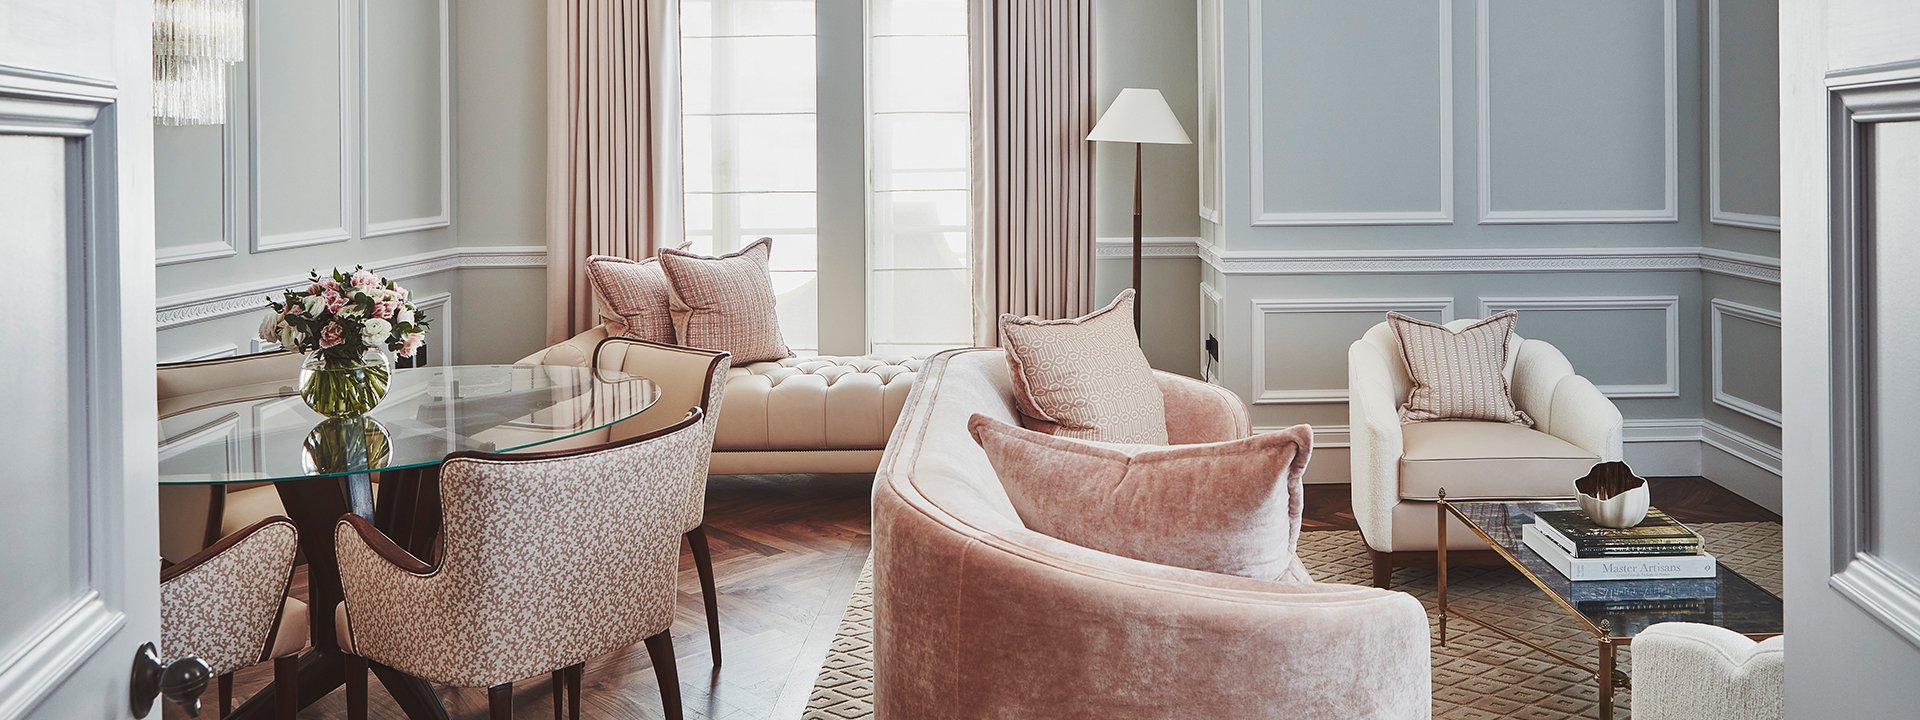 Comfortable sofas and armchairs in the luxurious interior of the sitting room in the Mayfair Terrace Suite.